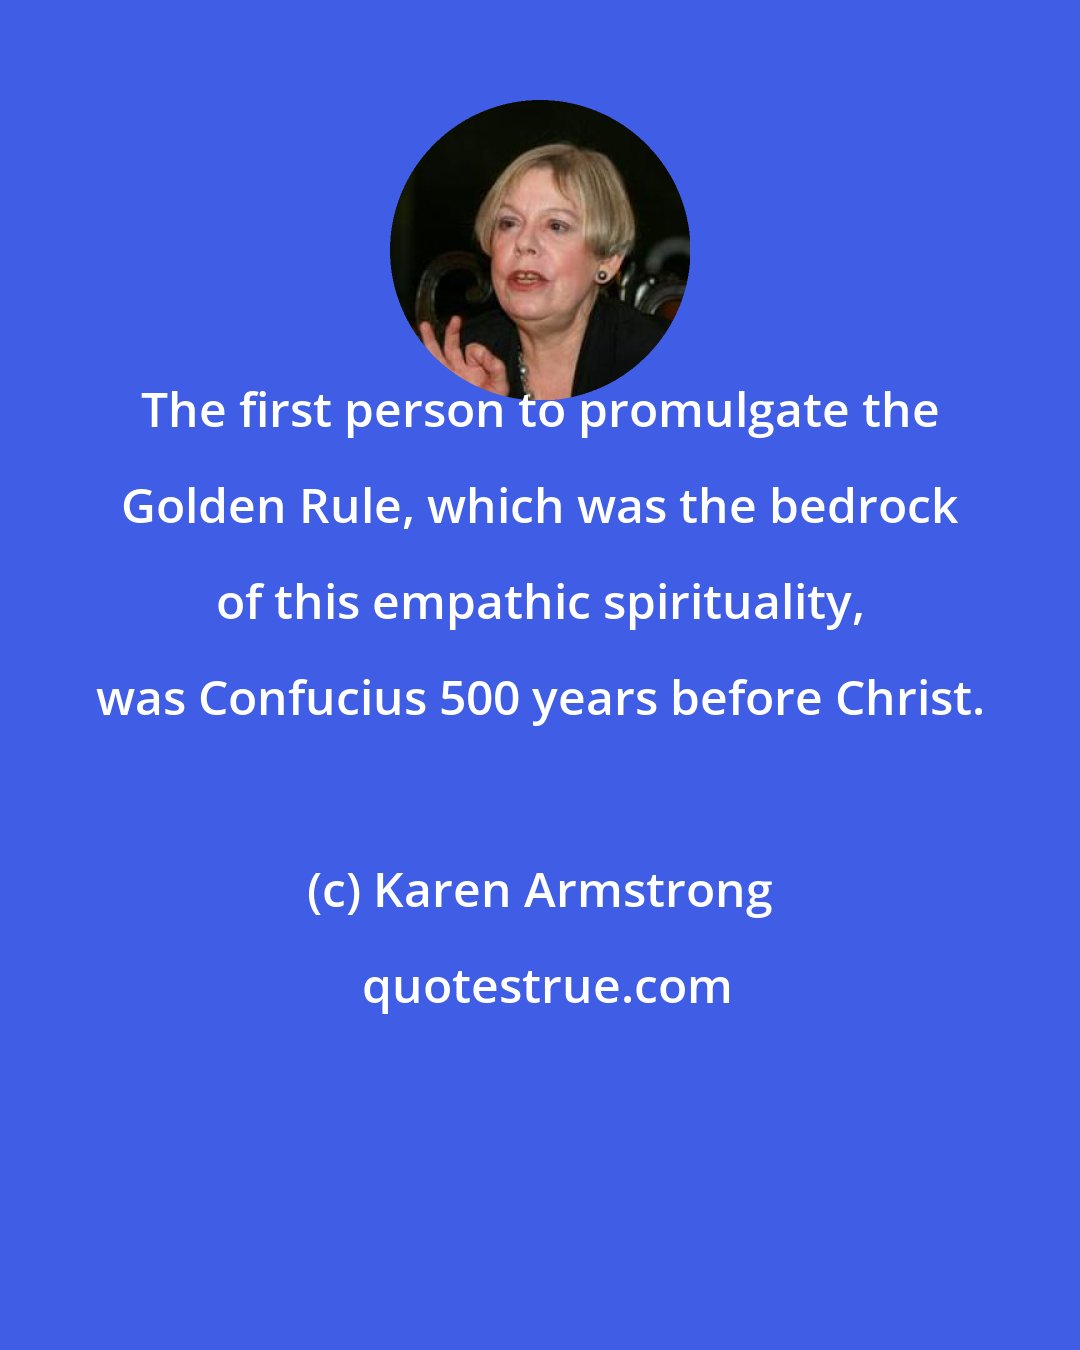 Karen Armstrong: The first person to promulgate the Golden Rule, which was the bedrock of this empathic spirituality, was Confucius 500 years before Christ.